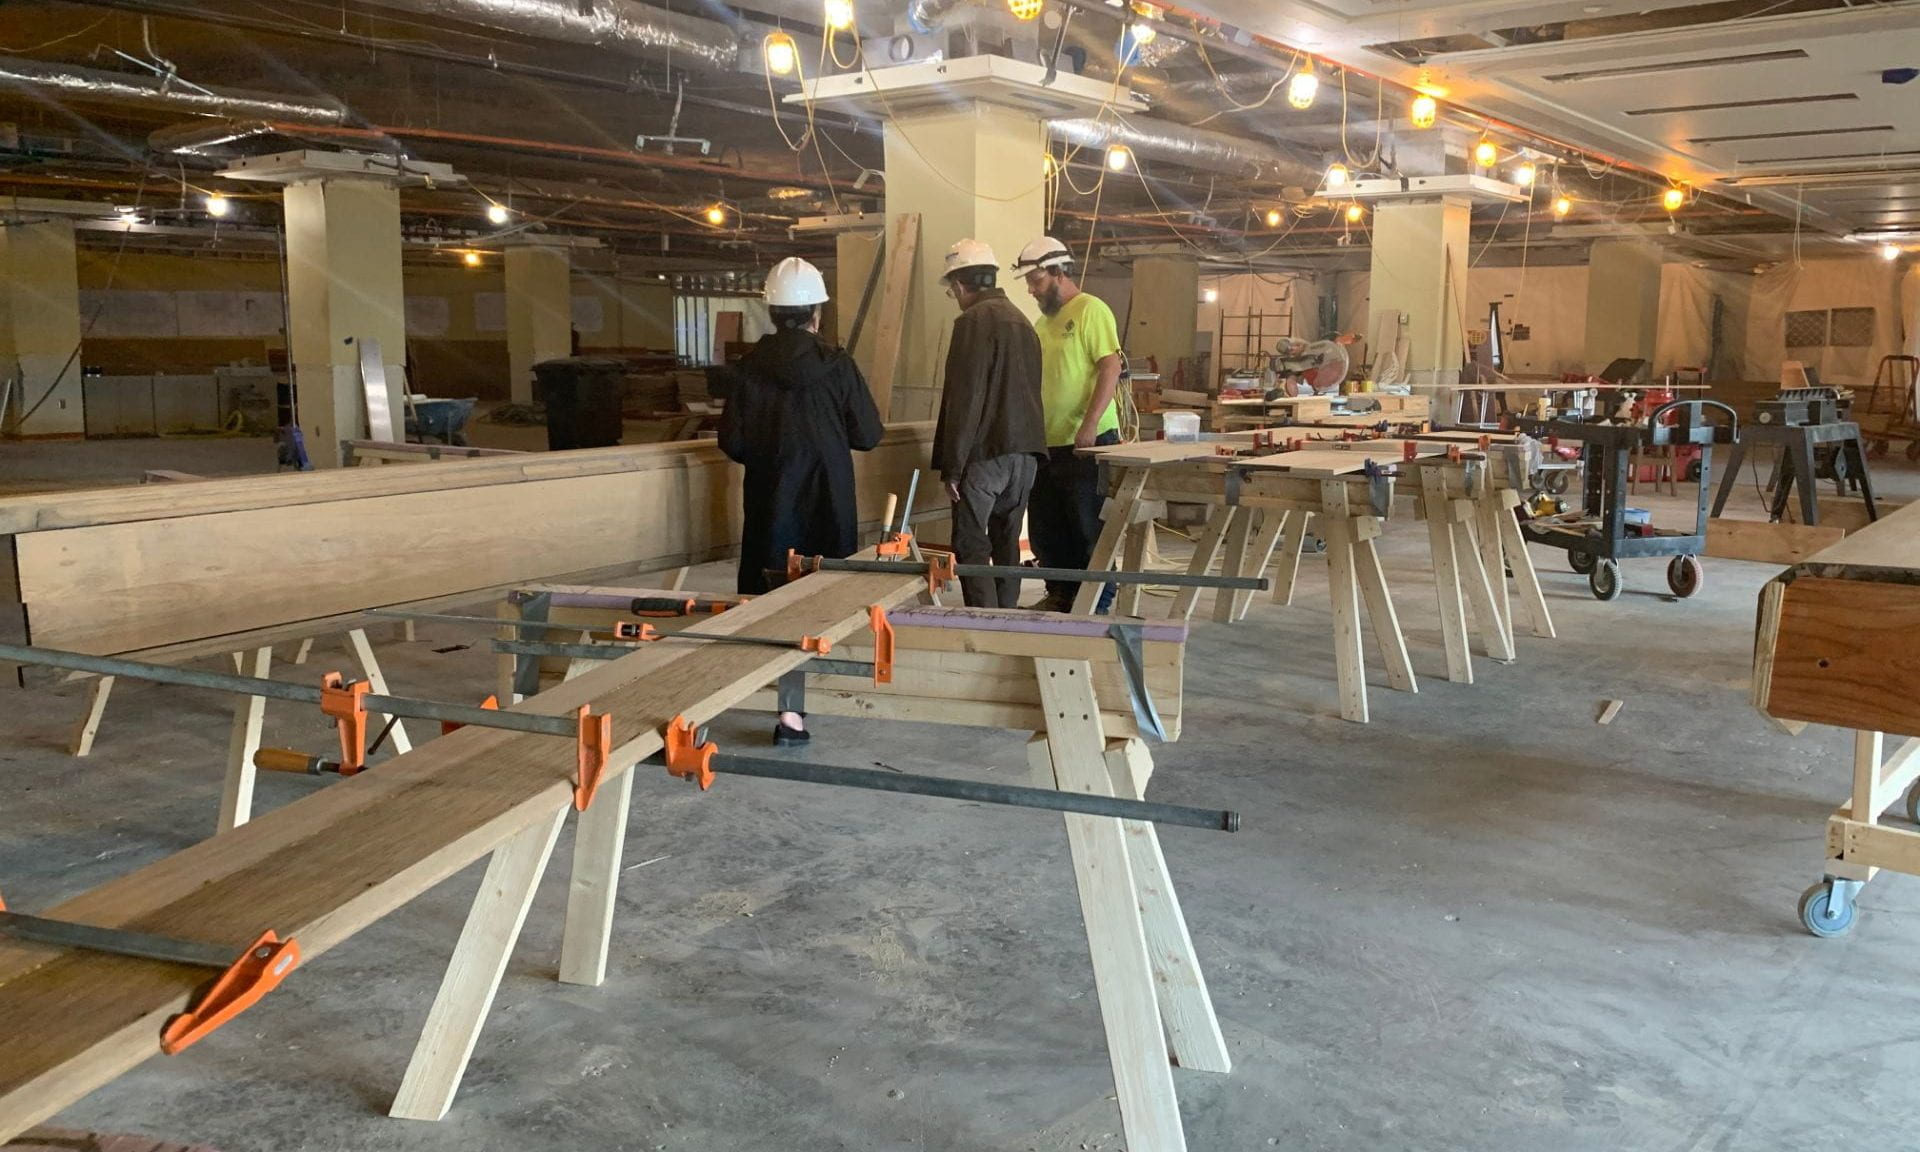 Dean of Libraries, Lori Goetsch, and Associate Dean, Mike Haddock, talk with a worker. They are surrounded by wood in various stages of repair.